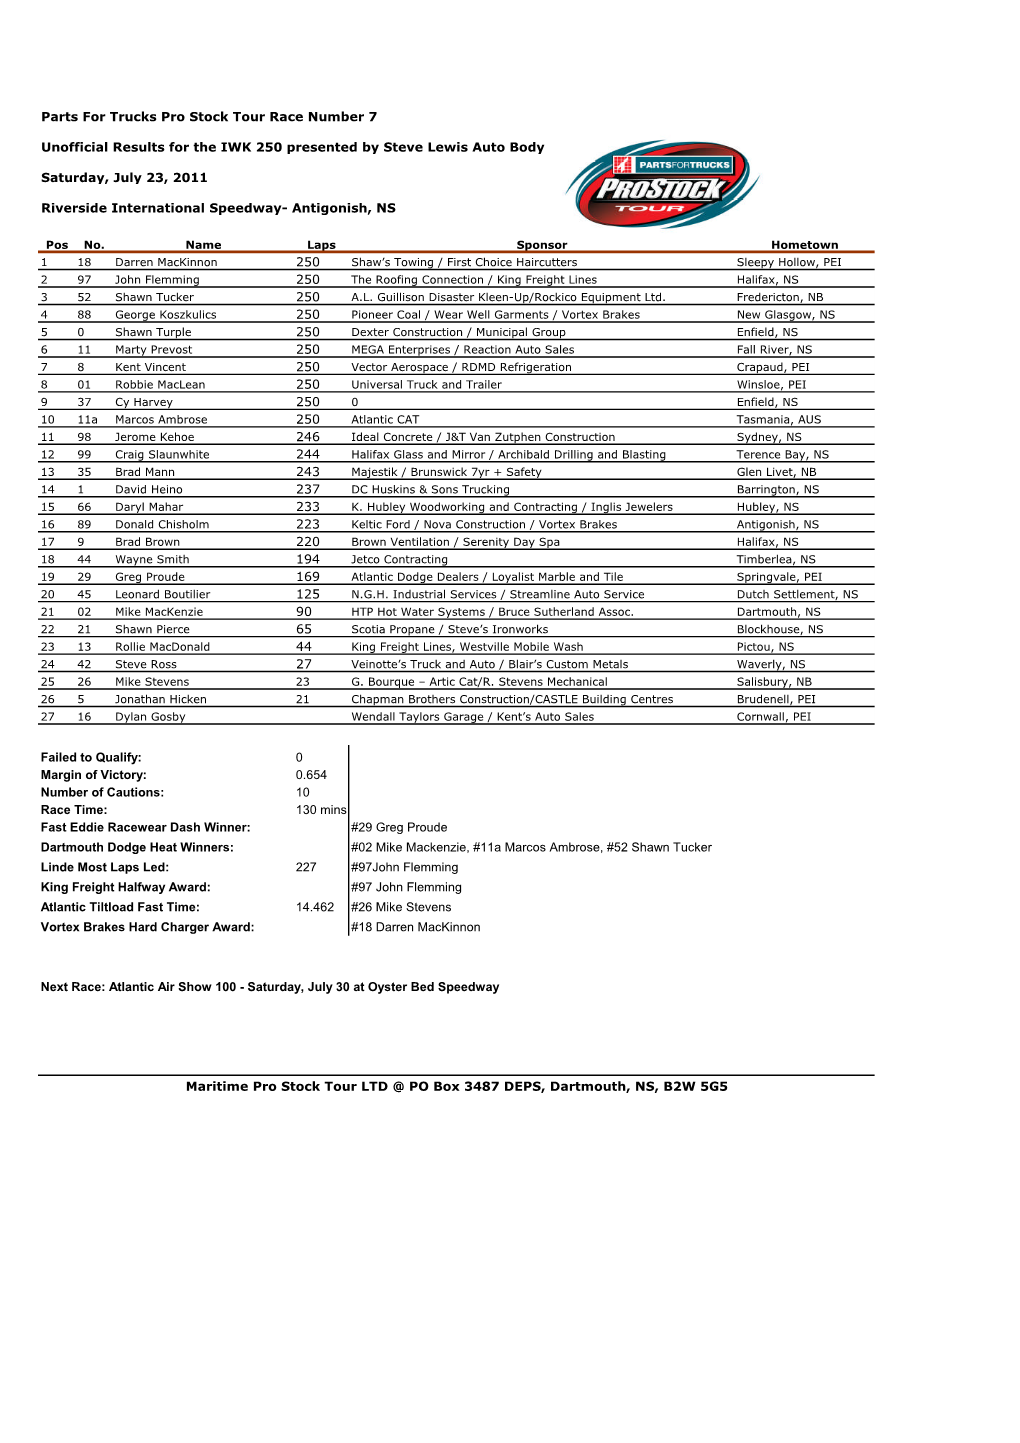 Unofficial Race Results IWK 250 July 23